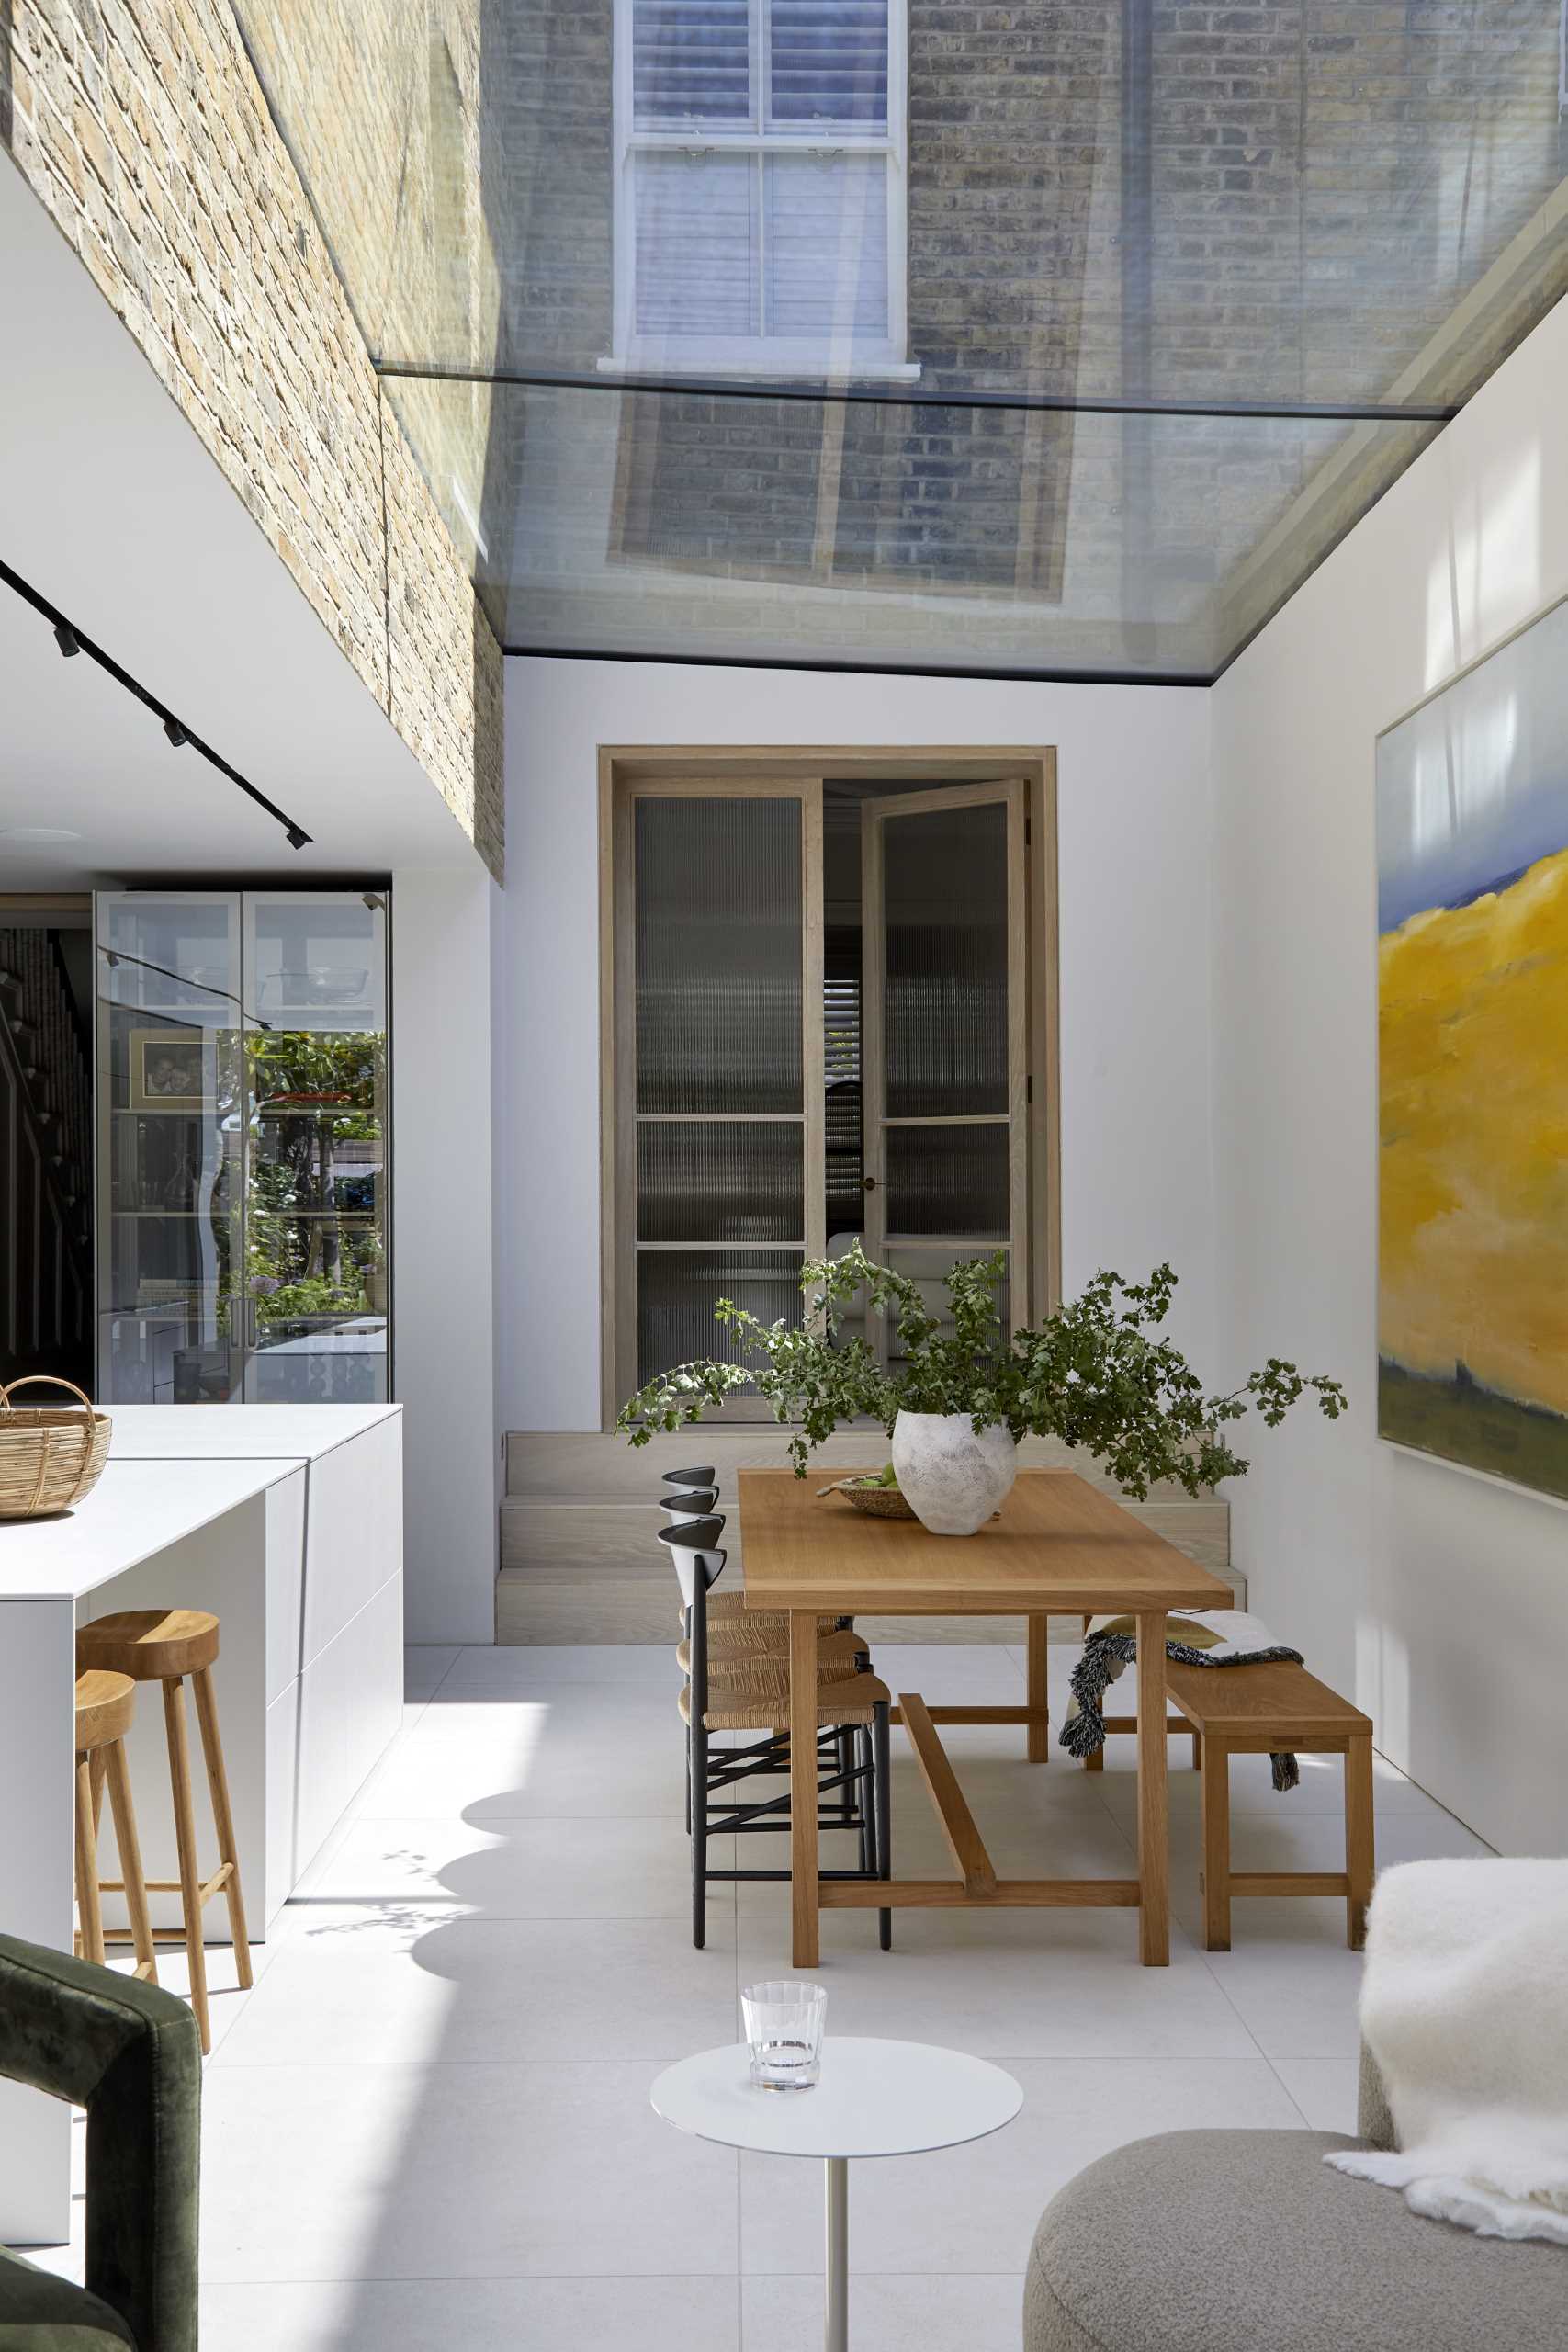 A modern extension has a large skylight above the dining area.